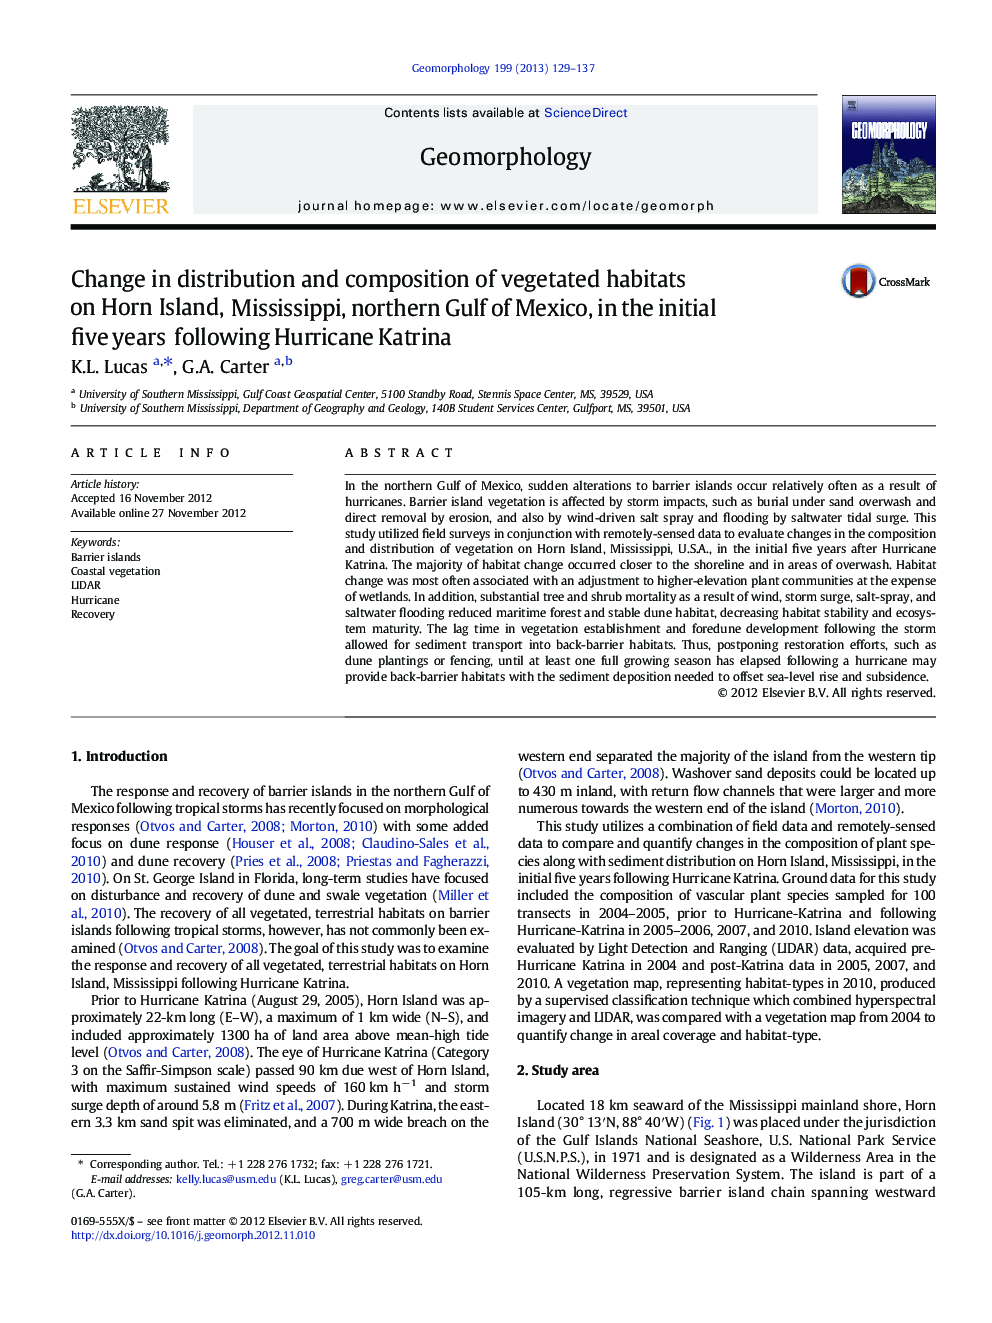 Change in distribution and composition of vegetated habitats on Horn Island, Mississippi, northern Gulf of Mexico, in the initial five years following Hurricane Katrina